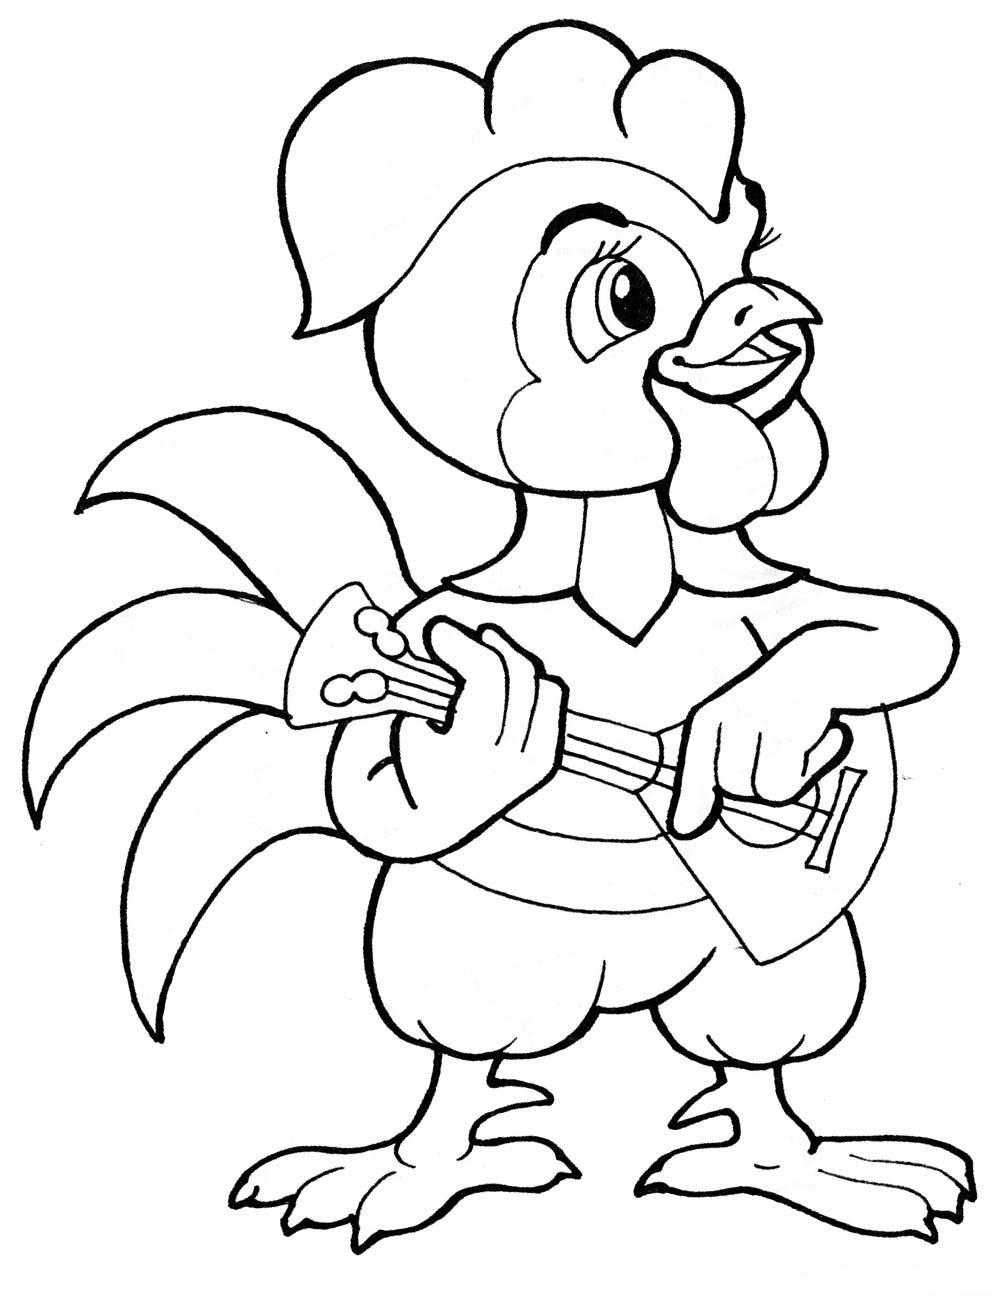 Coloring Figure of a rooster with a musical instrument. Category Pets allowed. Tags:  The cock.